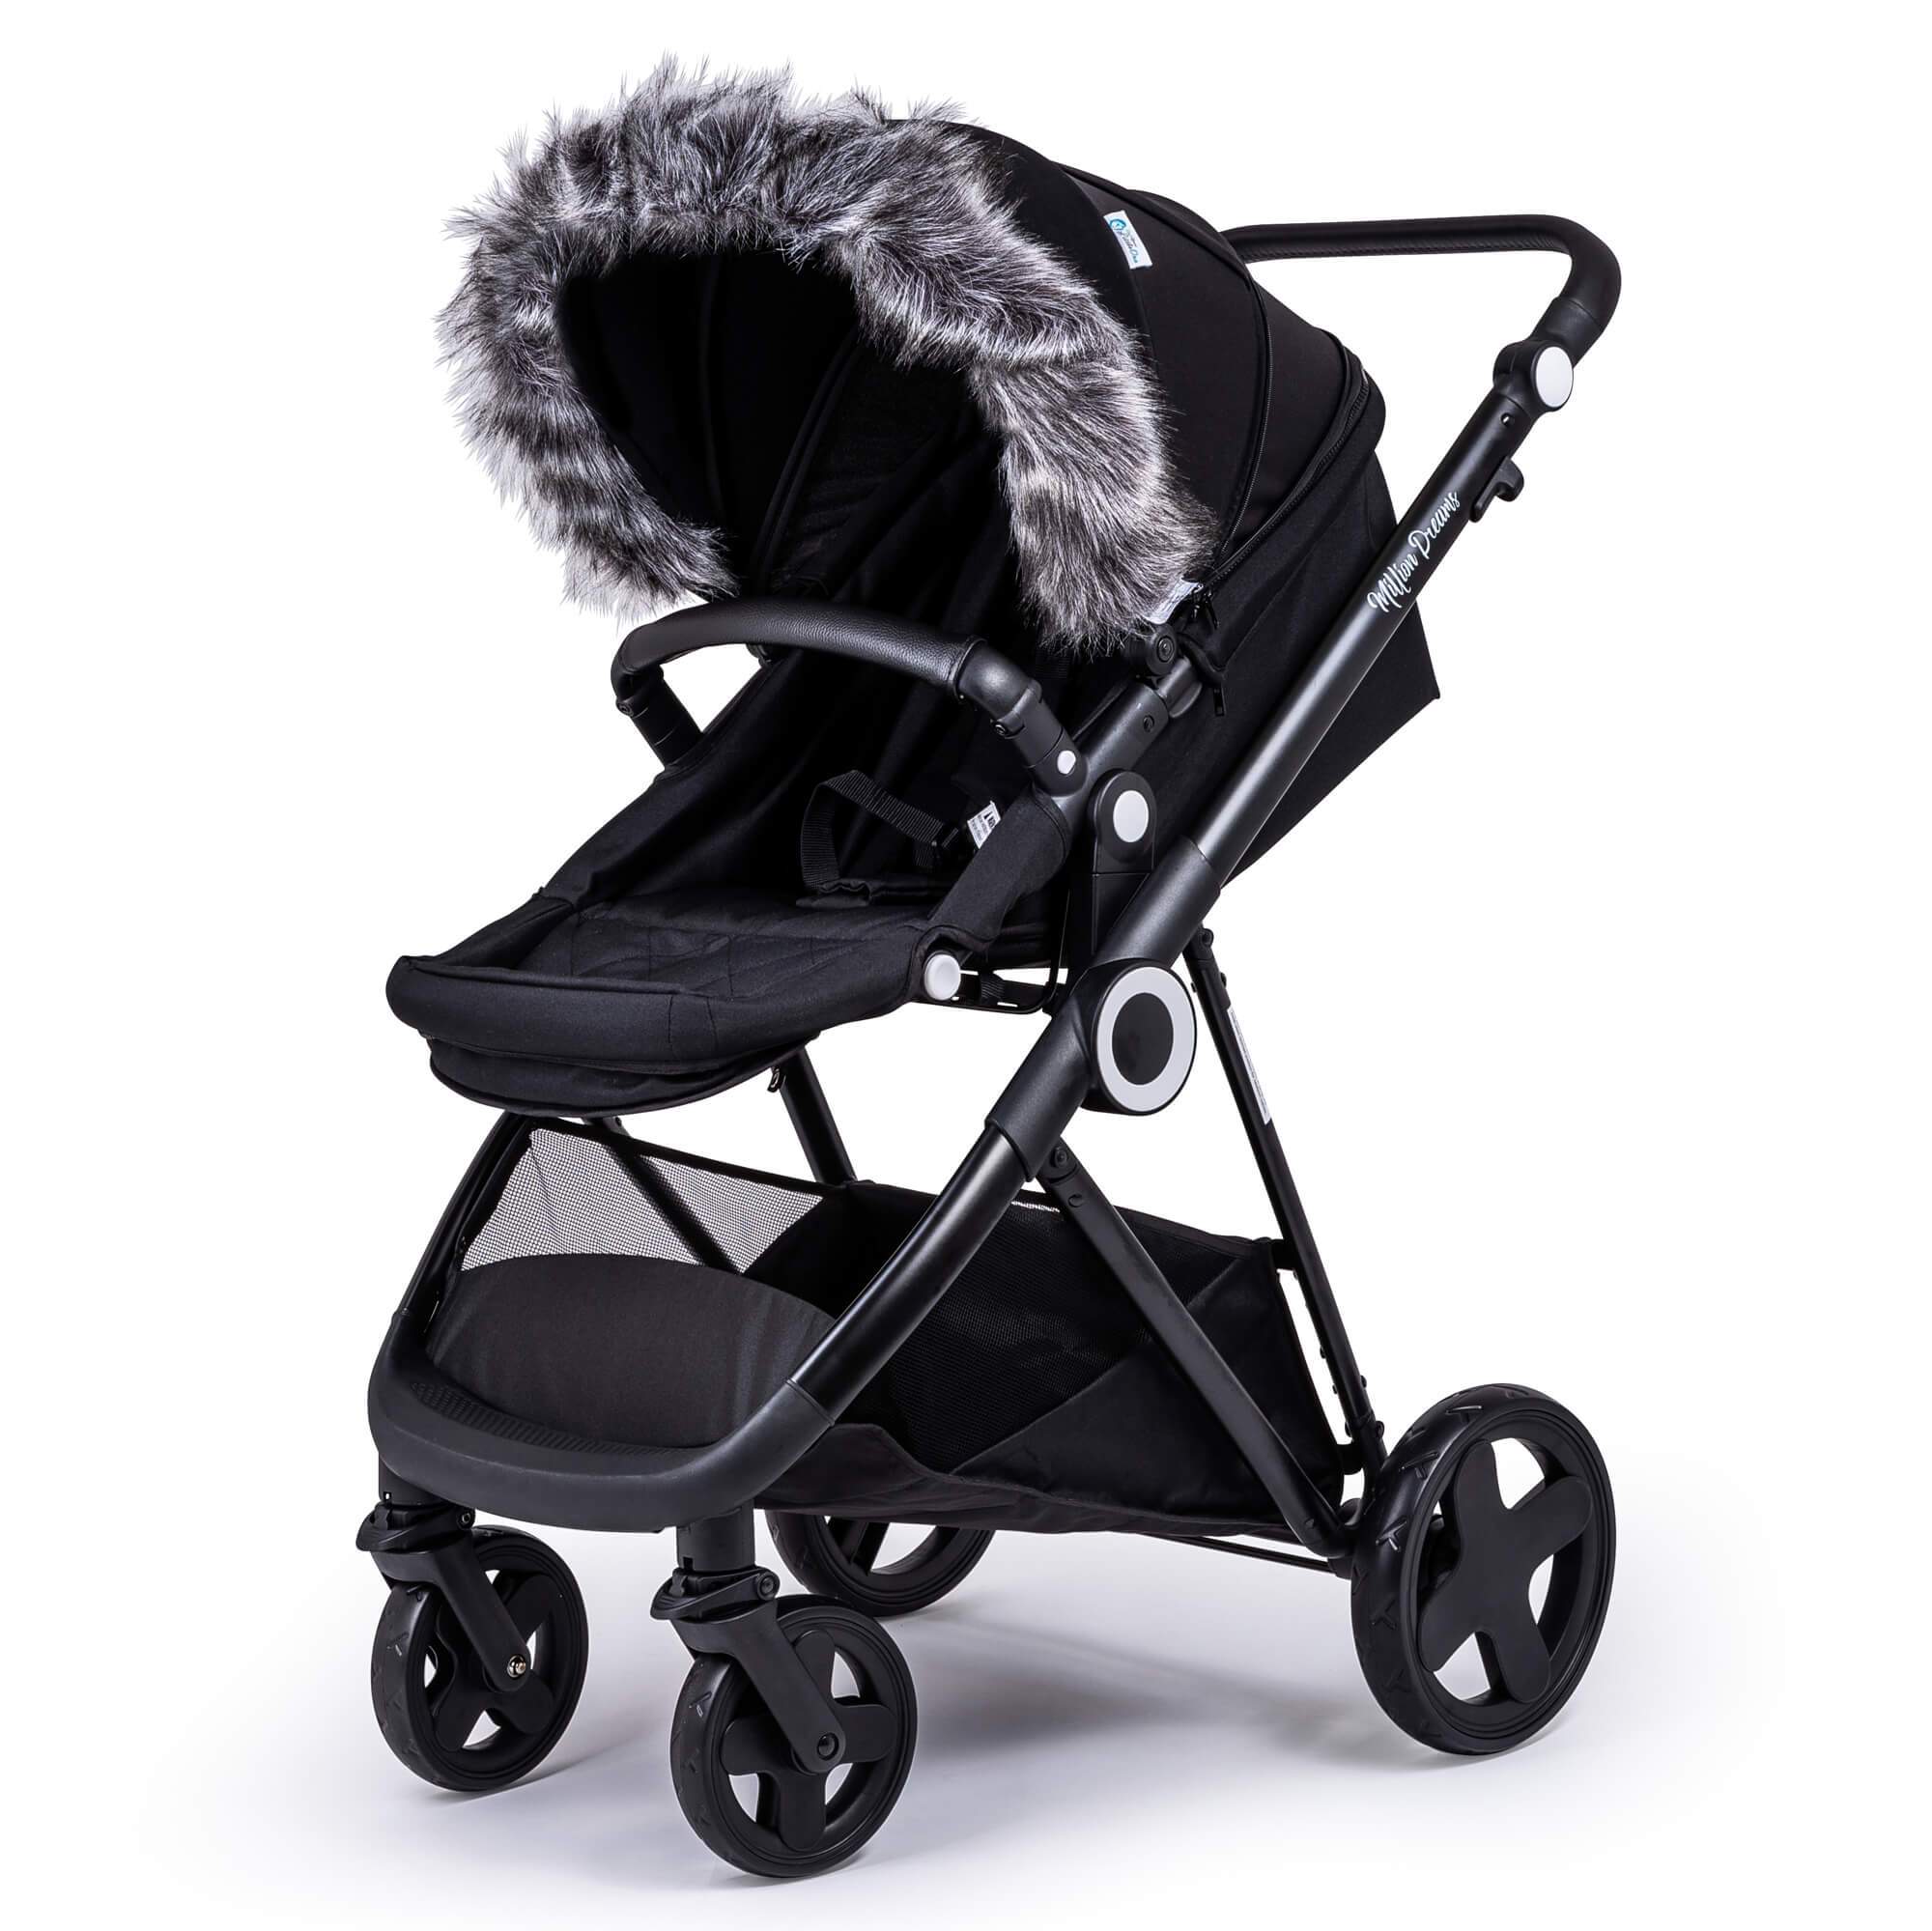 Pram Fur Hood Trim Attachment for Pushchair Compatible with Chicco - Dark Grey / Fits All Models | For Your Little One